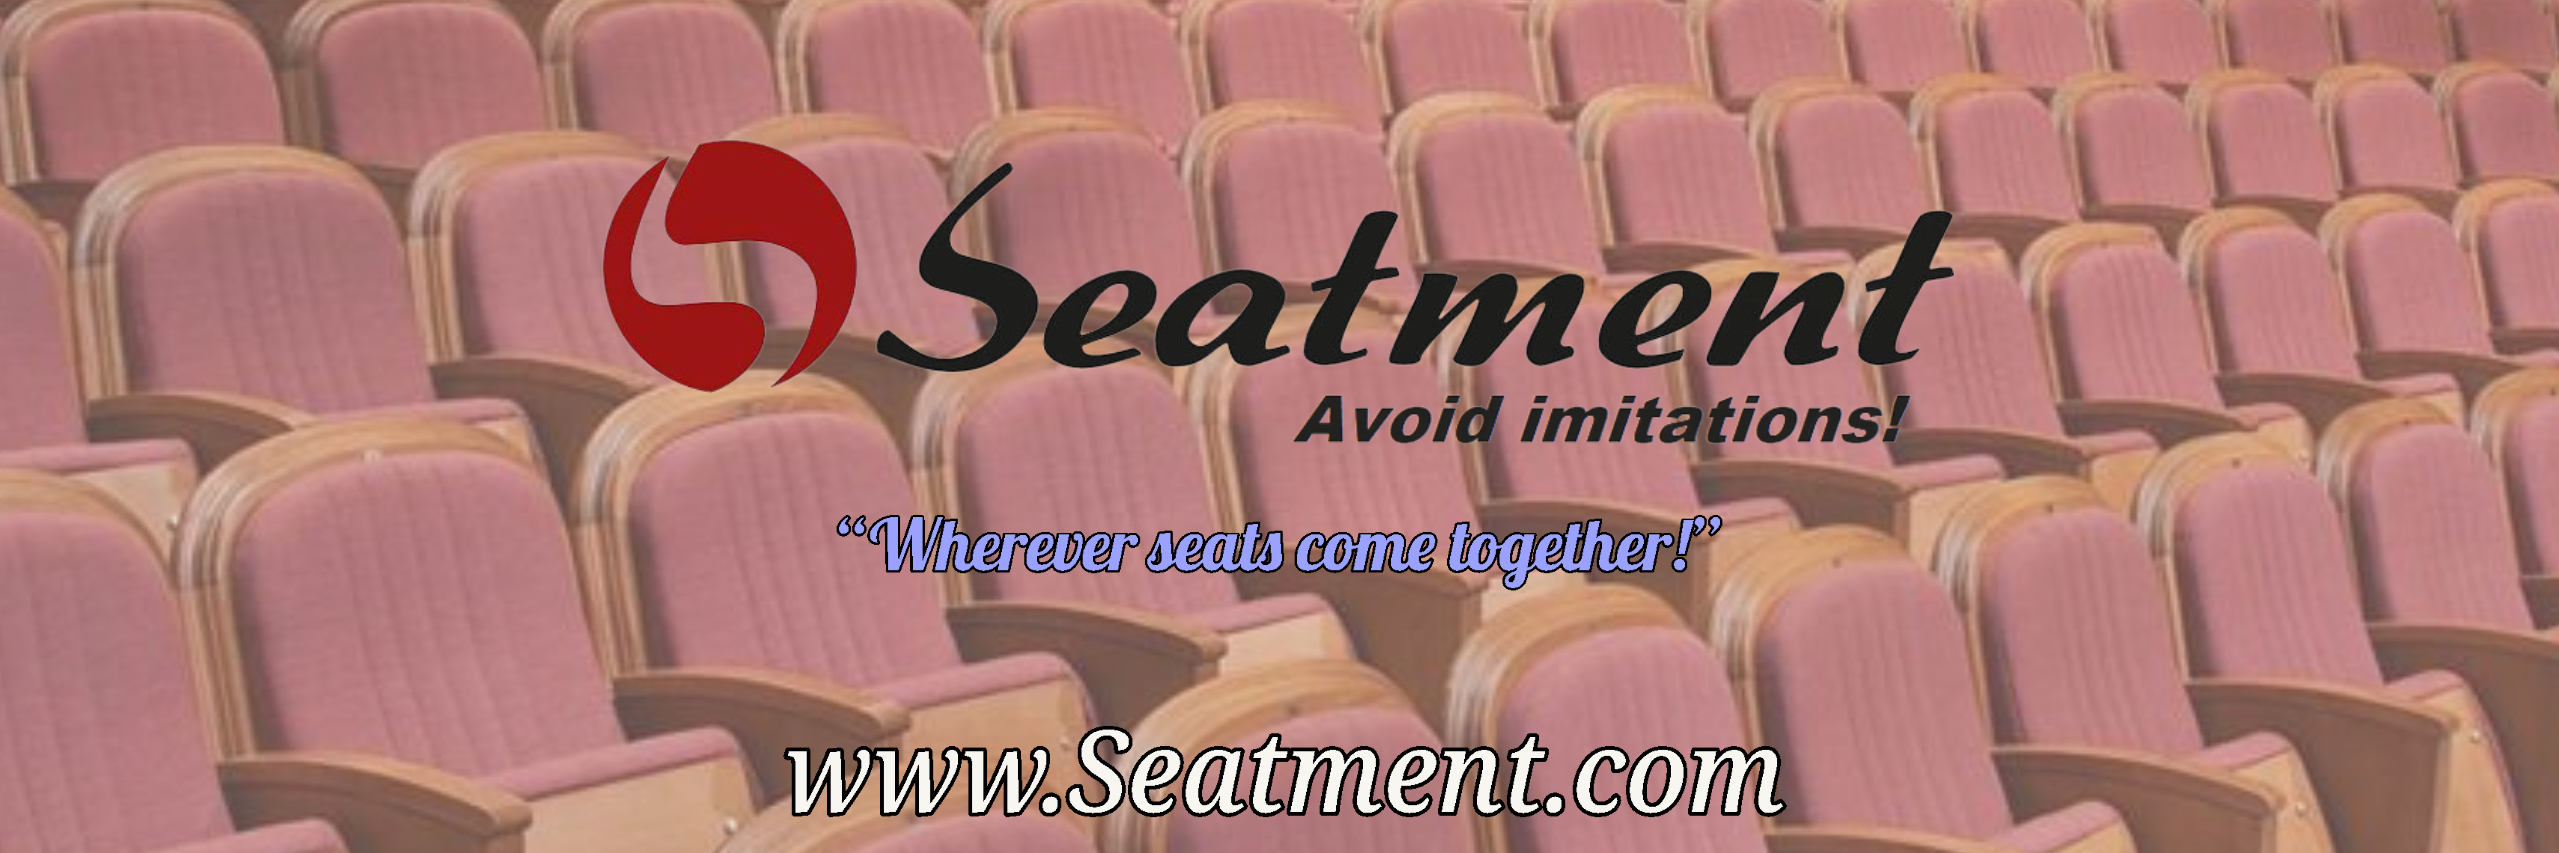 theater seat manufacturer